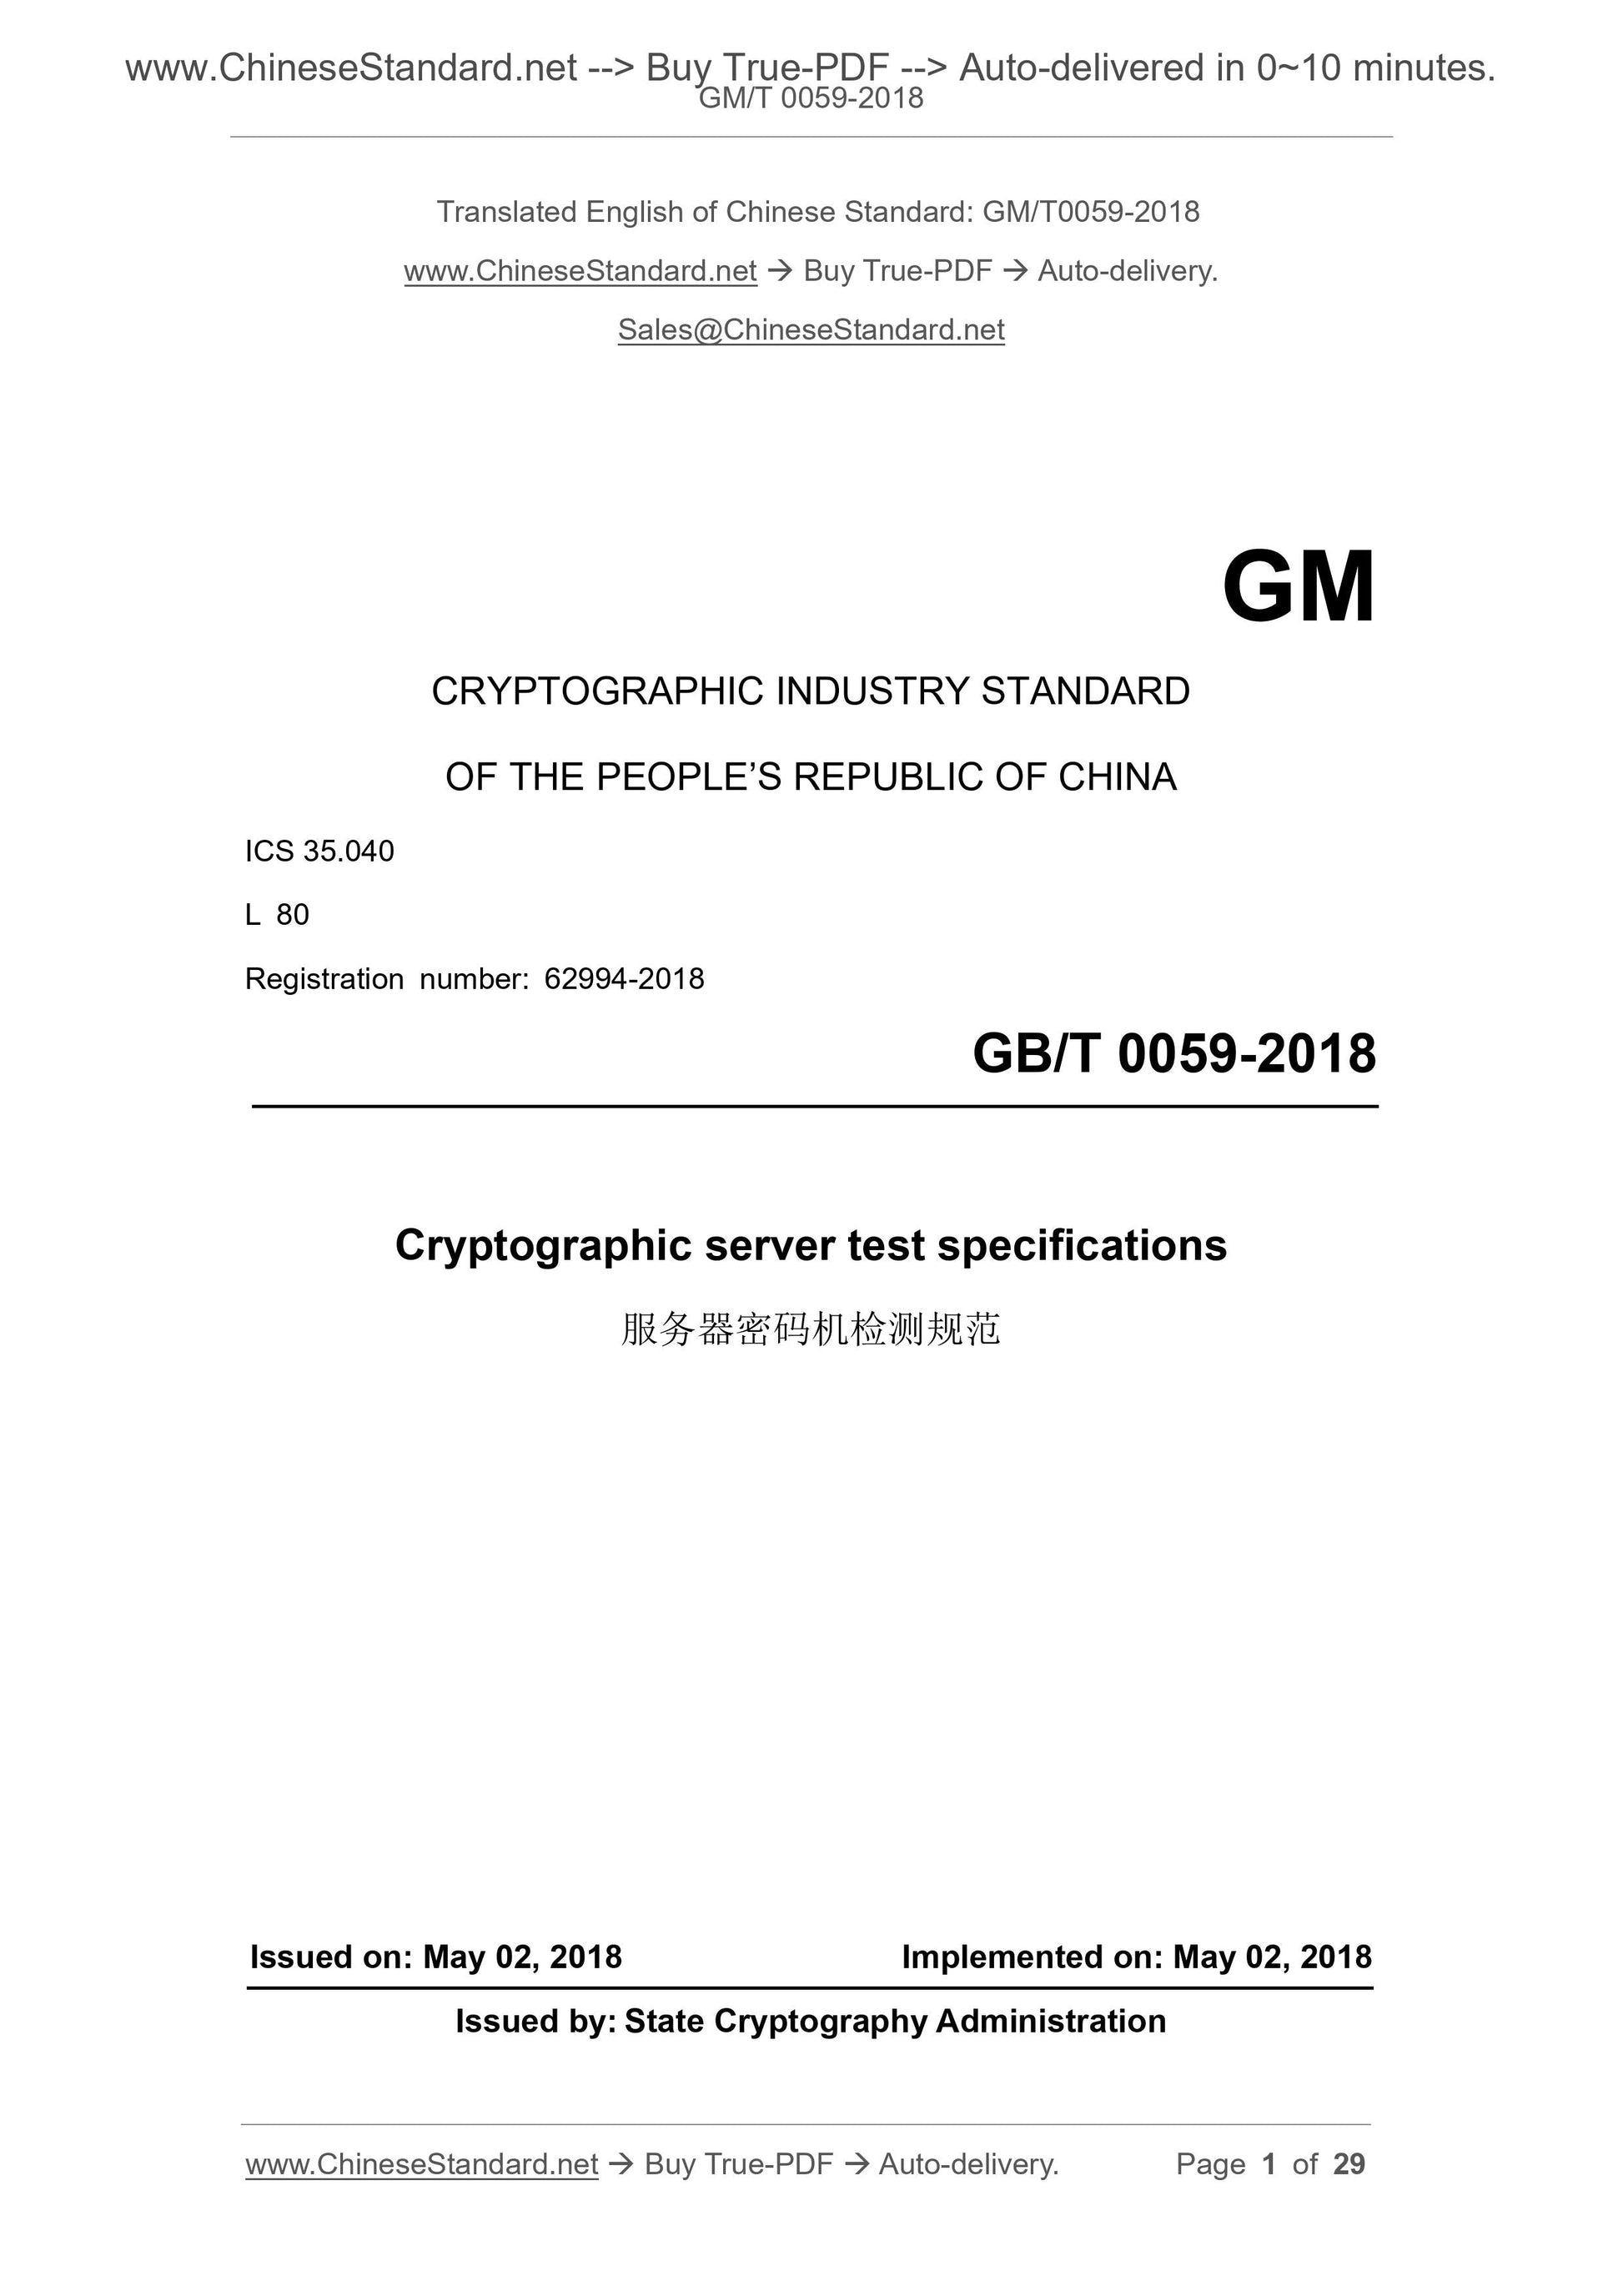 GM/T 0059-2018 Page 1